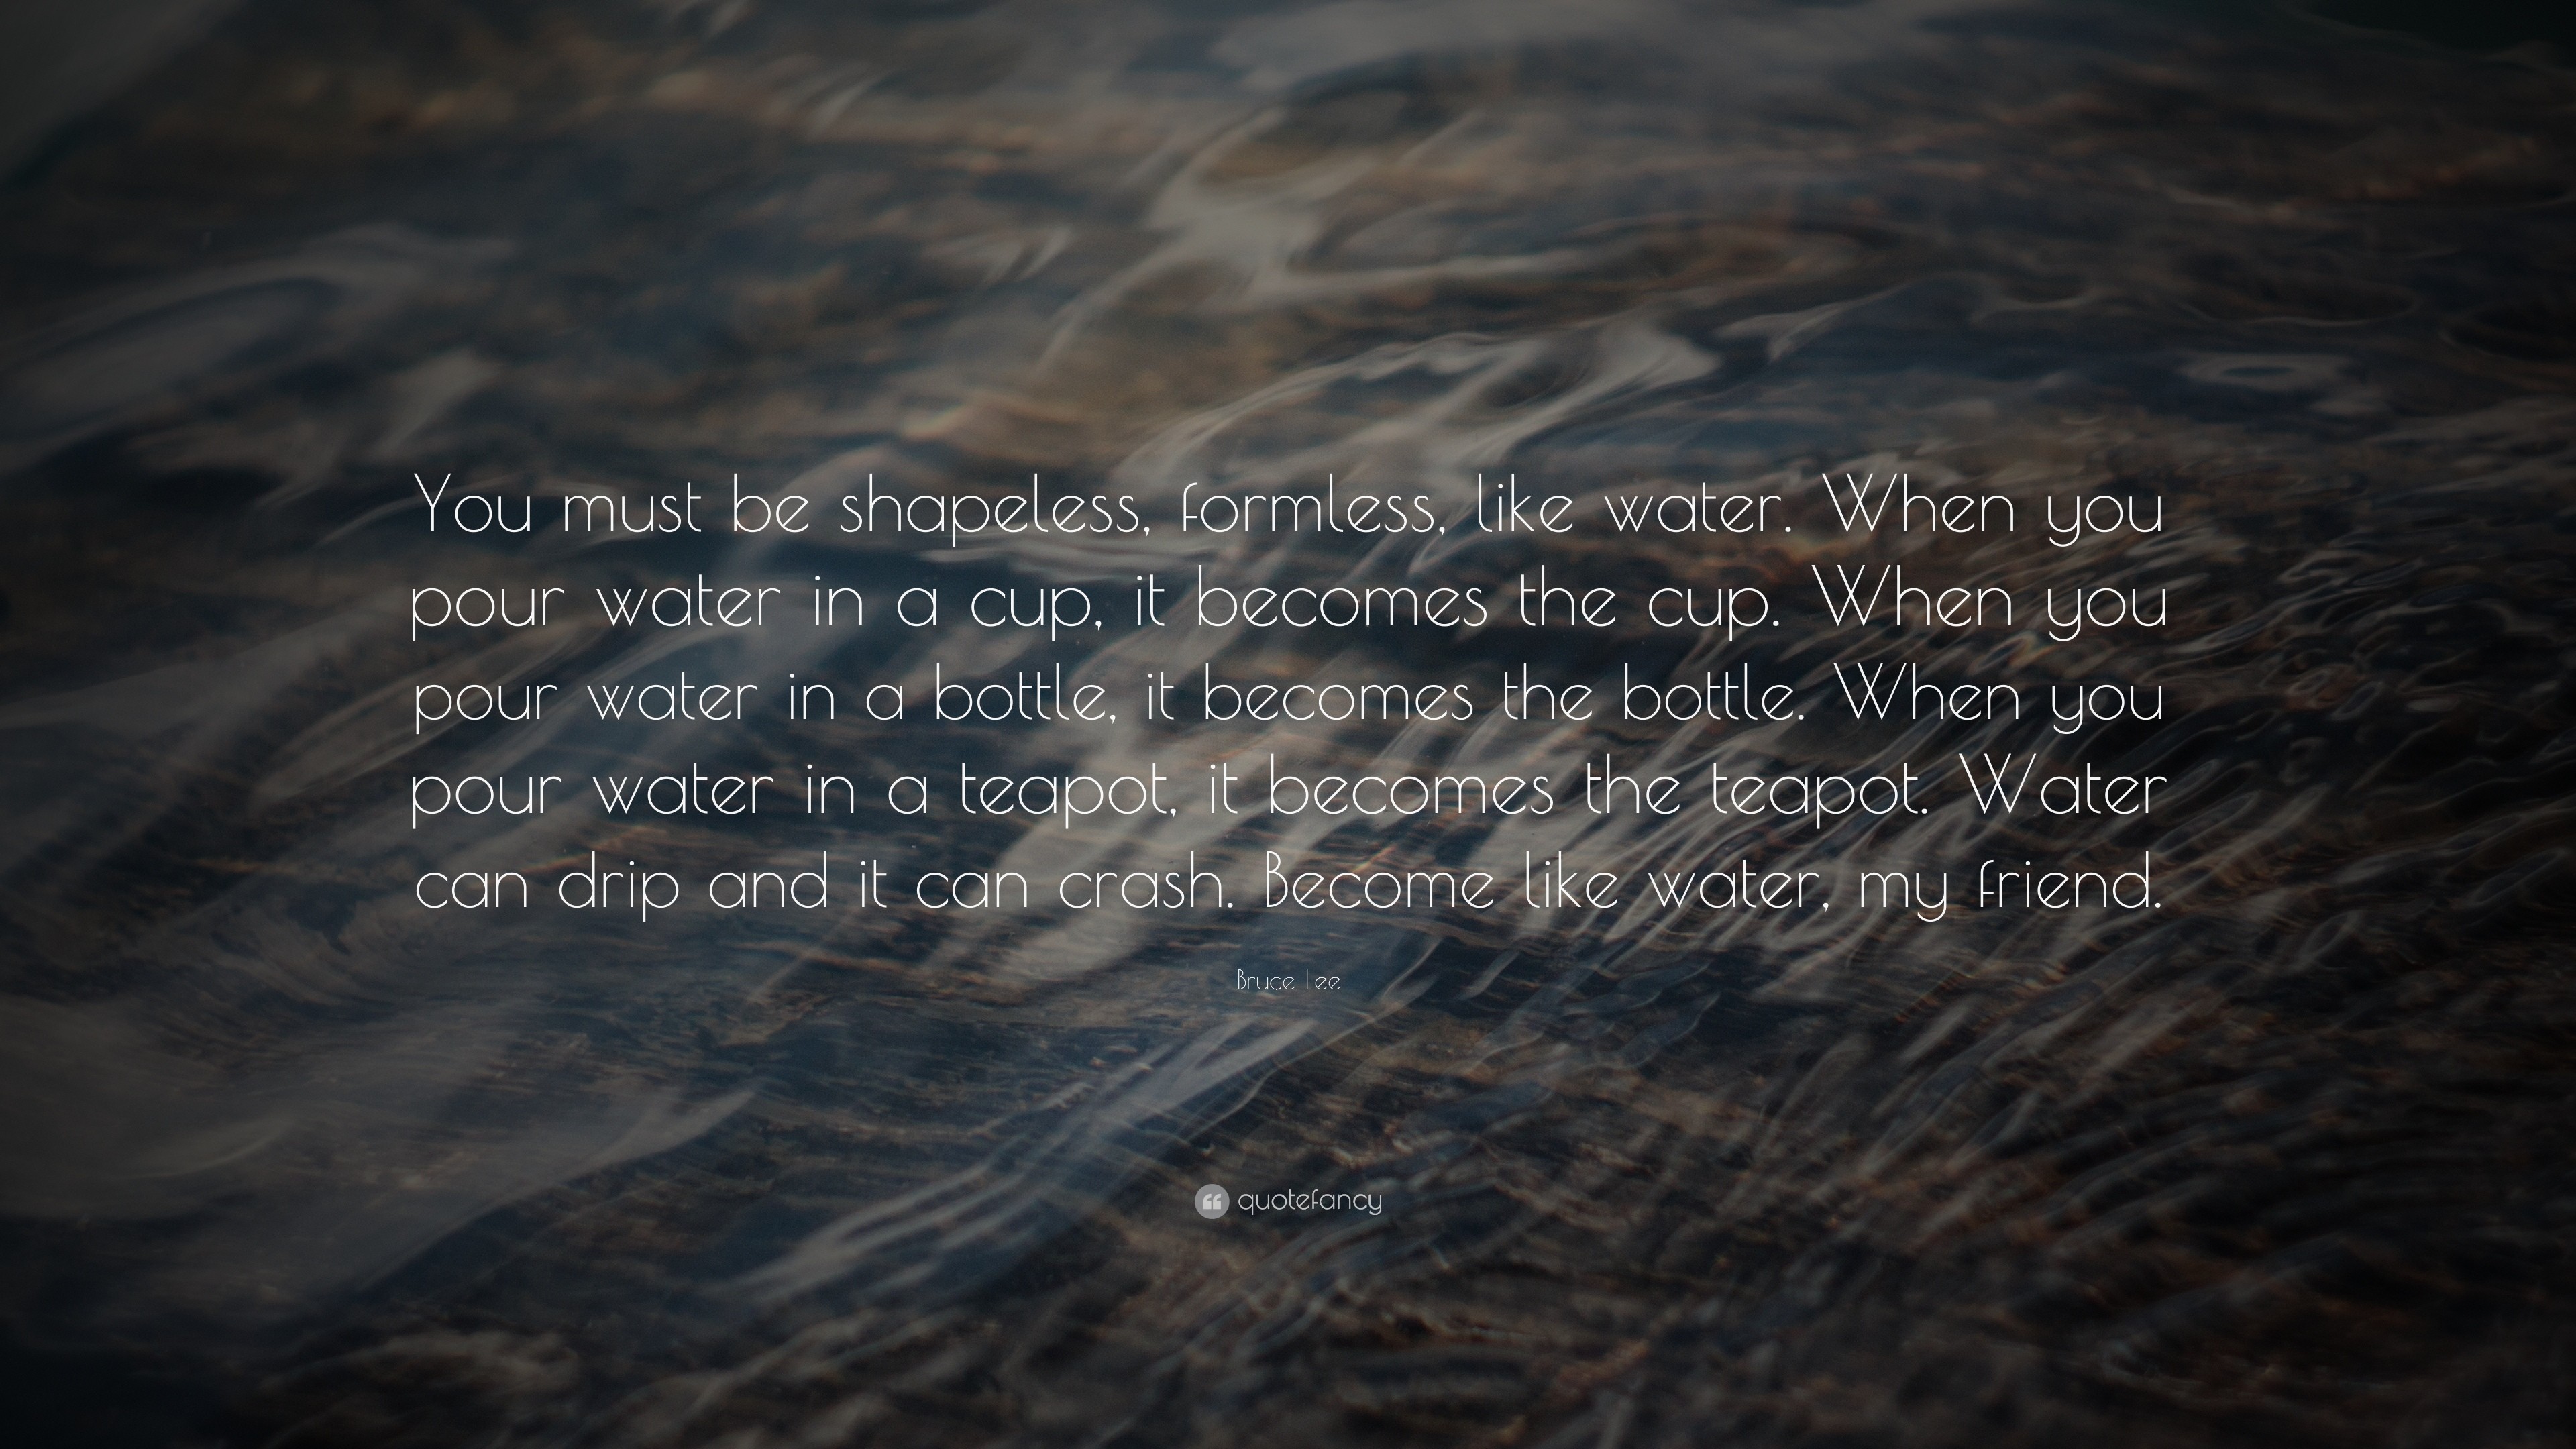 3840x2160 Learning Quotes: “You must be shapeless, formless, like water. When you